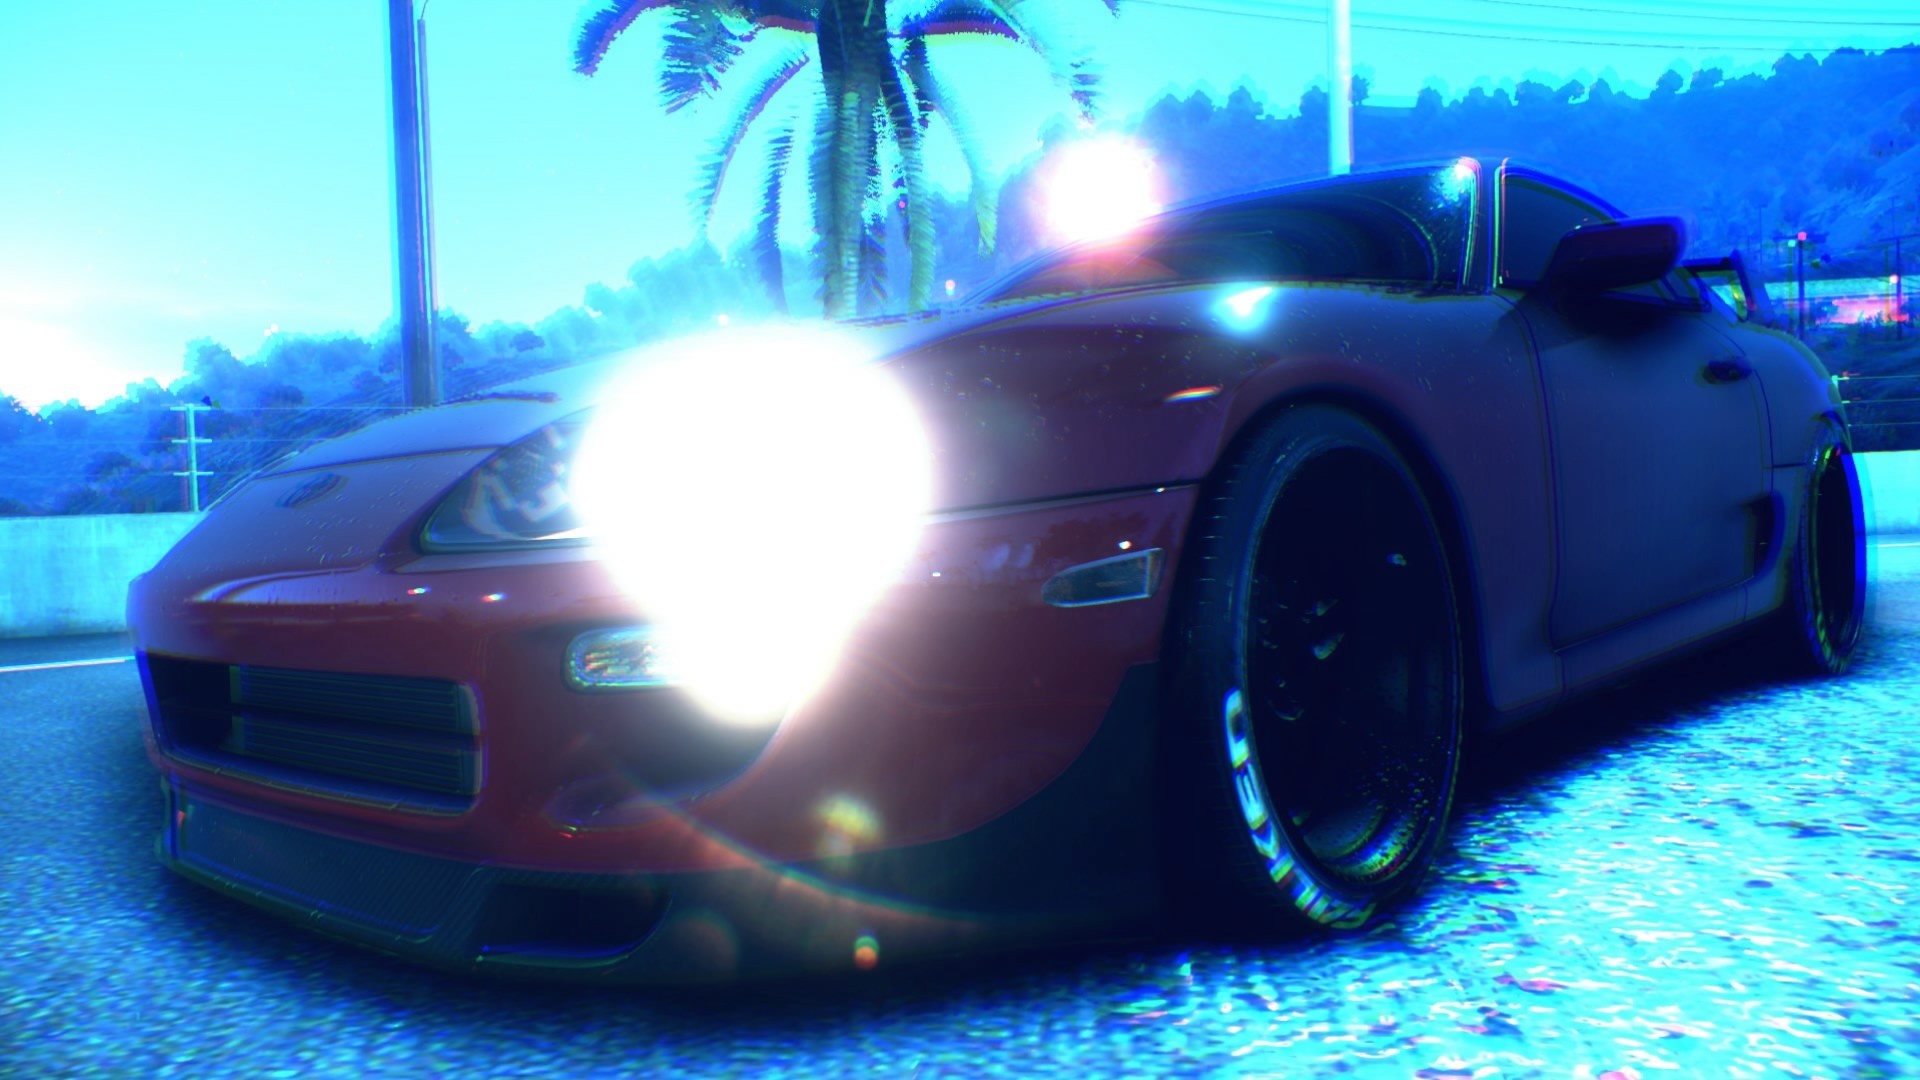 Toyota Supra, Supra, Toyota, Need for Speed, Need for Speed: Underground, Car Wallpaper